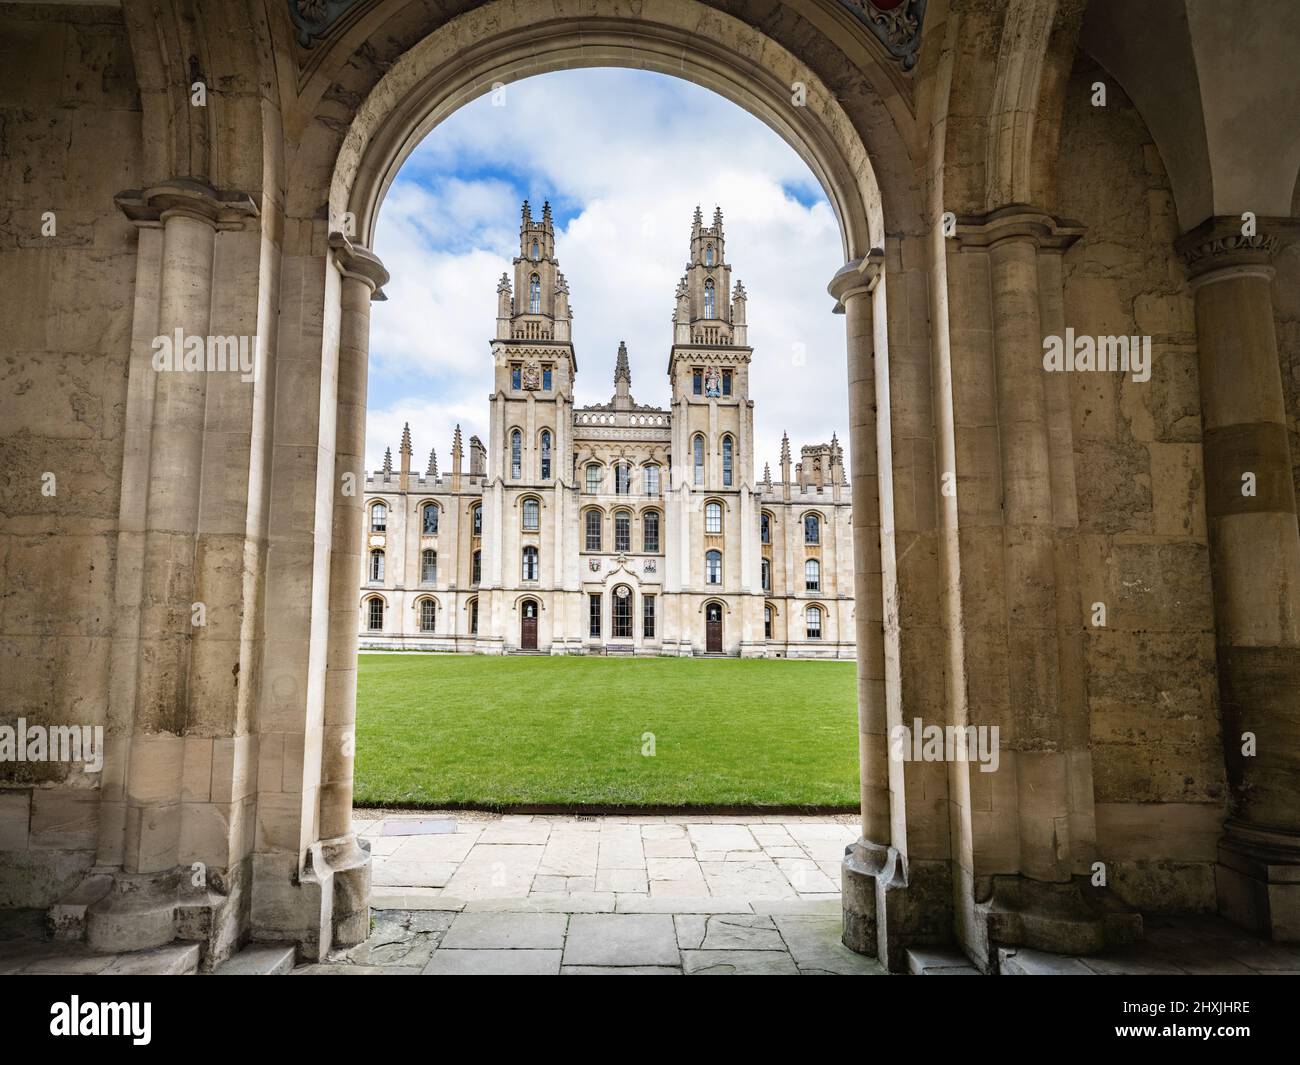 View through an arch of All Souls College quadrant, All Souls College is a constituent college of the University of Oxford, Stock Photo